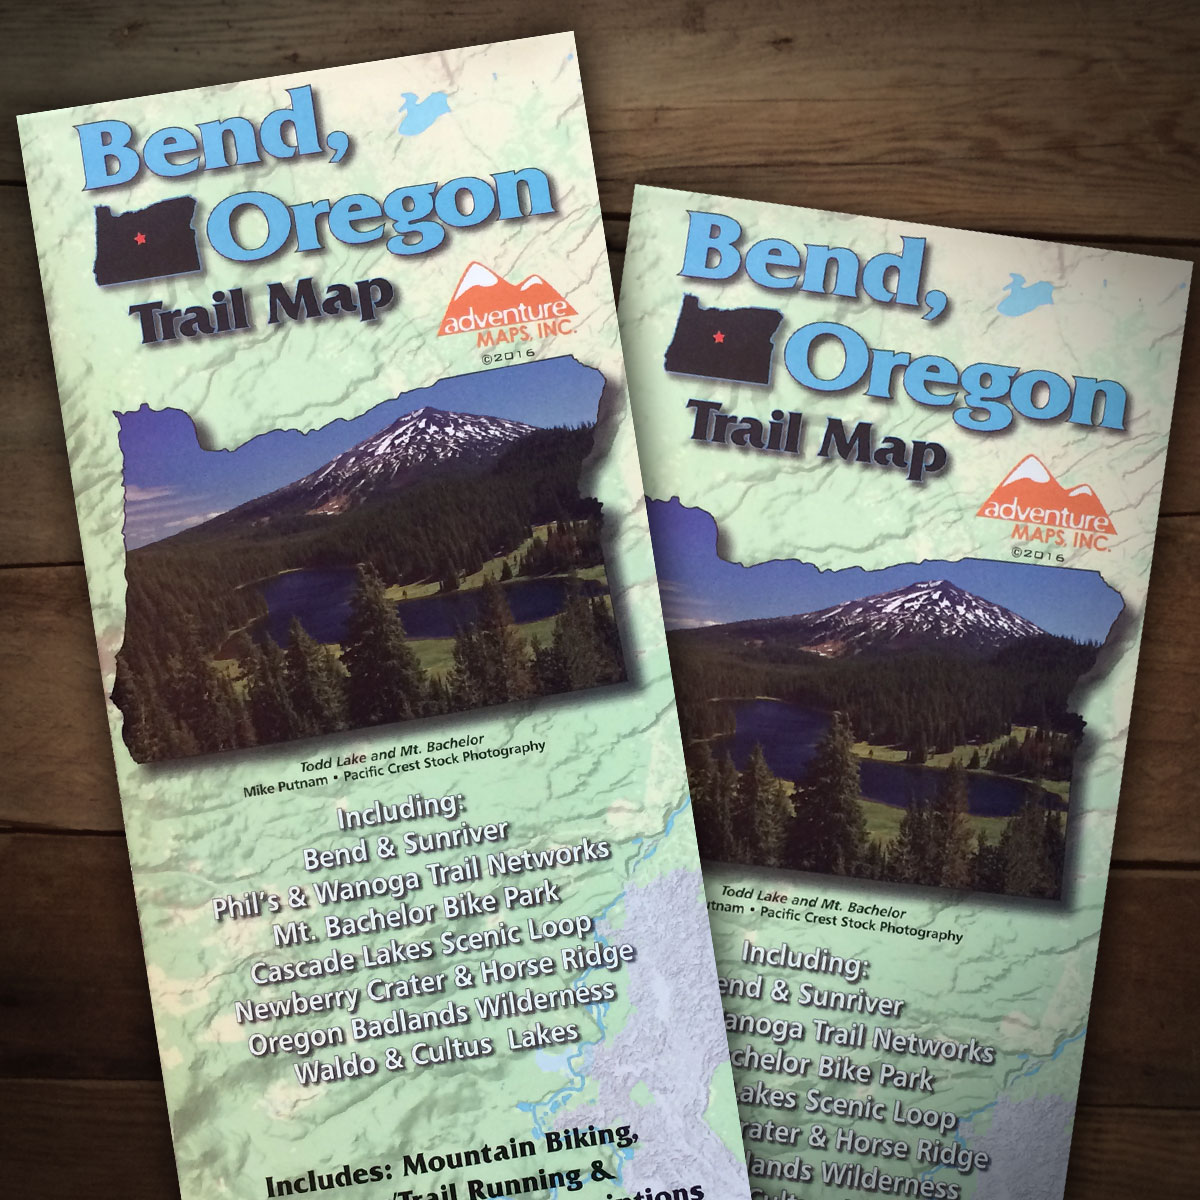 Bend Area Trail Map